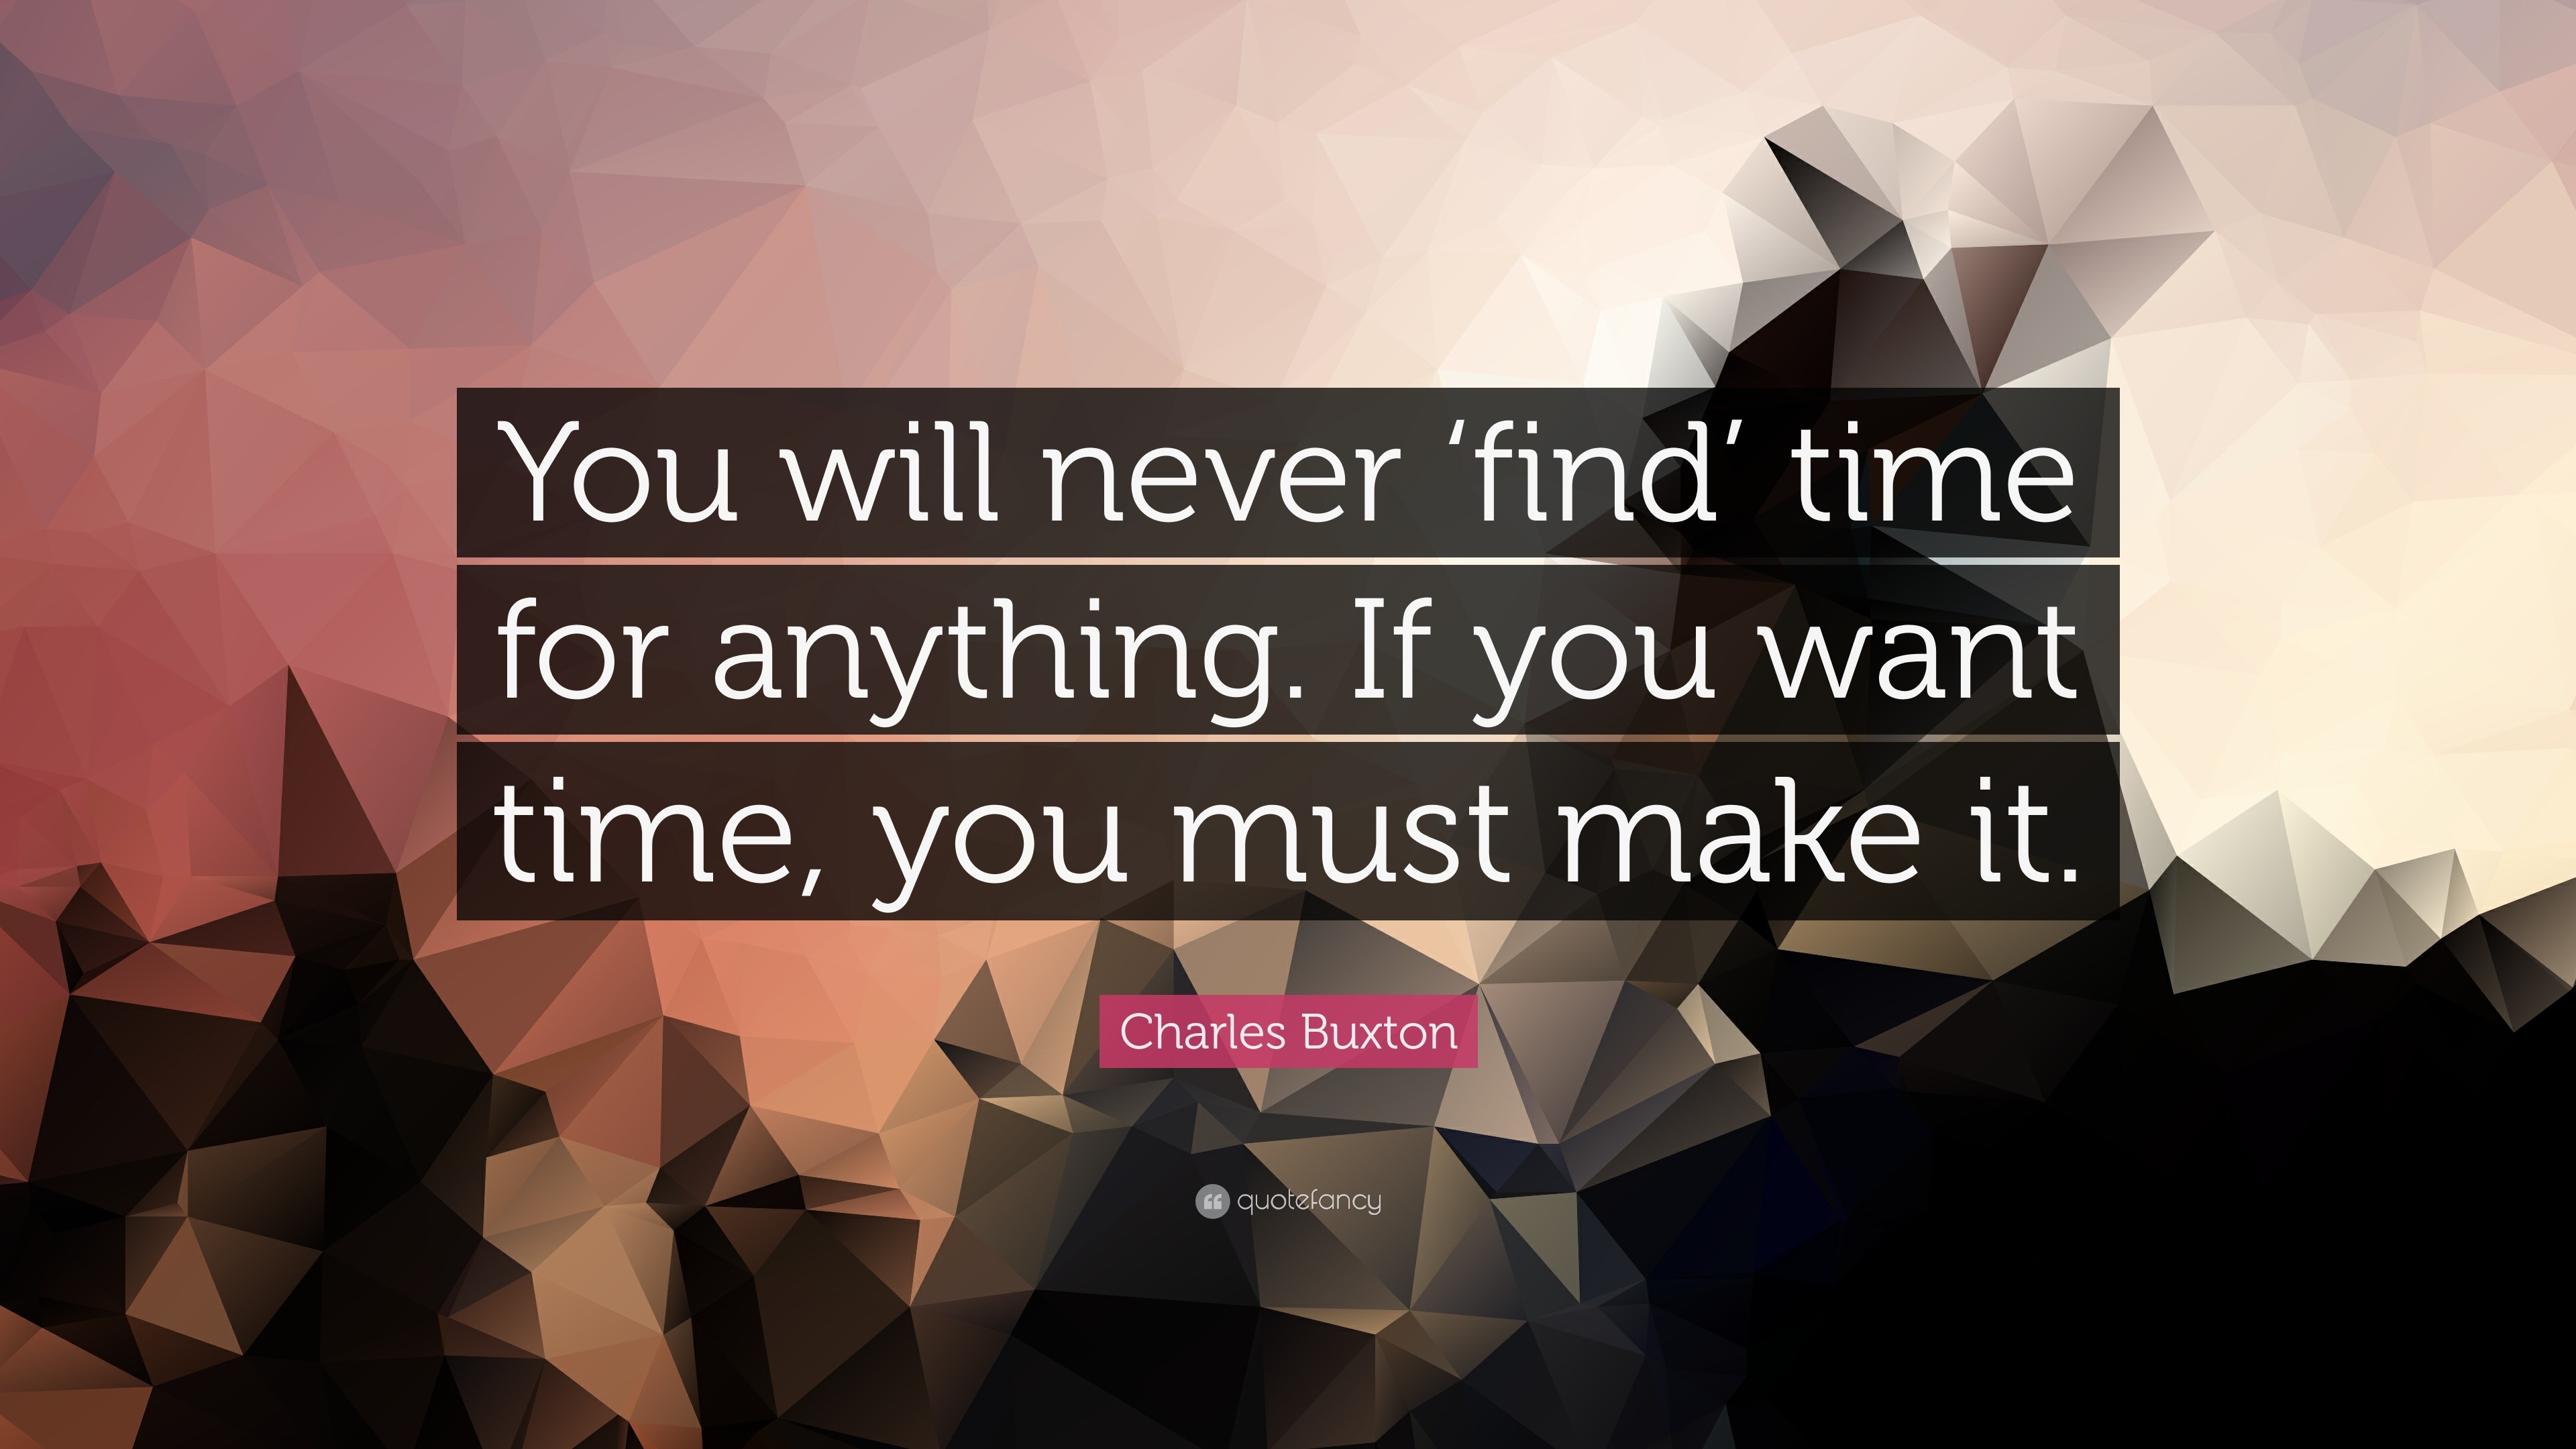 Charles Buxton Quote: “You will never ‘find’ time for anything. If you